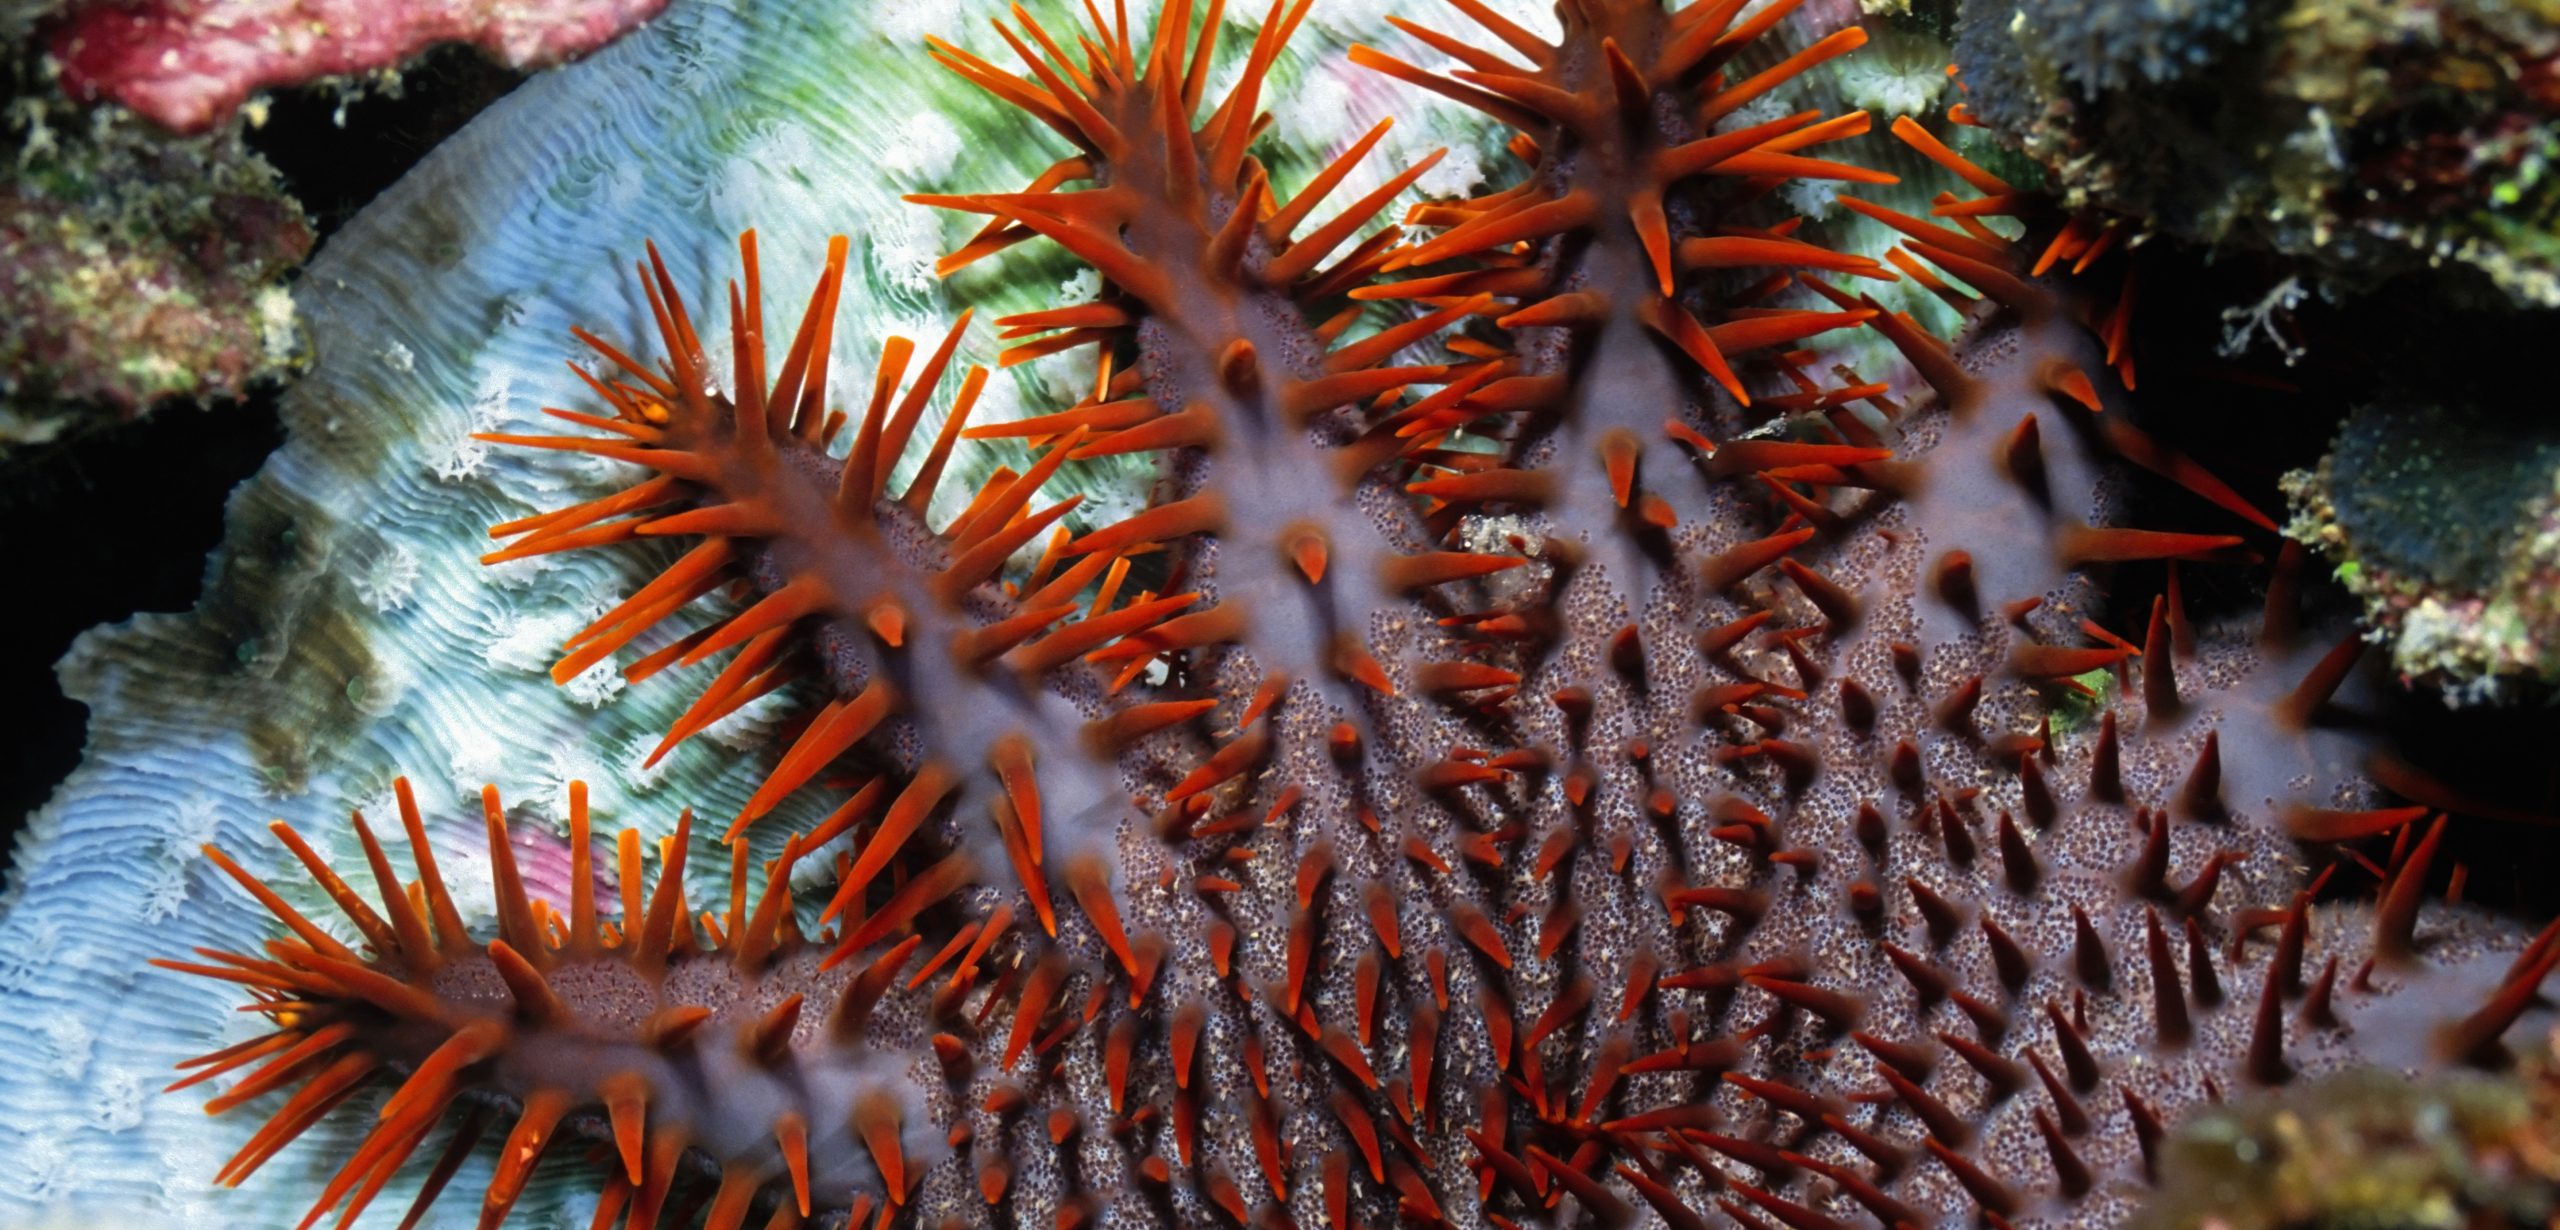 A spiky crown-of-thorns starfish feeds on a coral polyp in Micronesia. Photo by Norbert Wu/Science Faction/Corbis